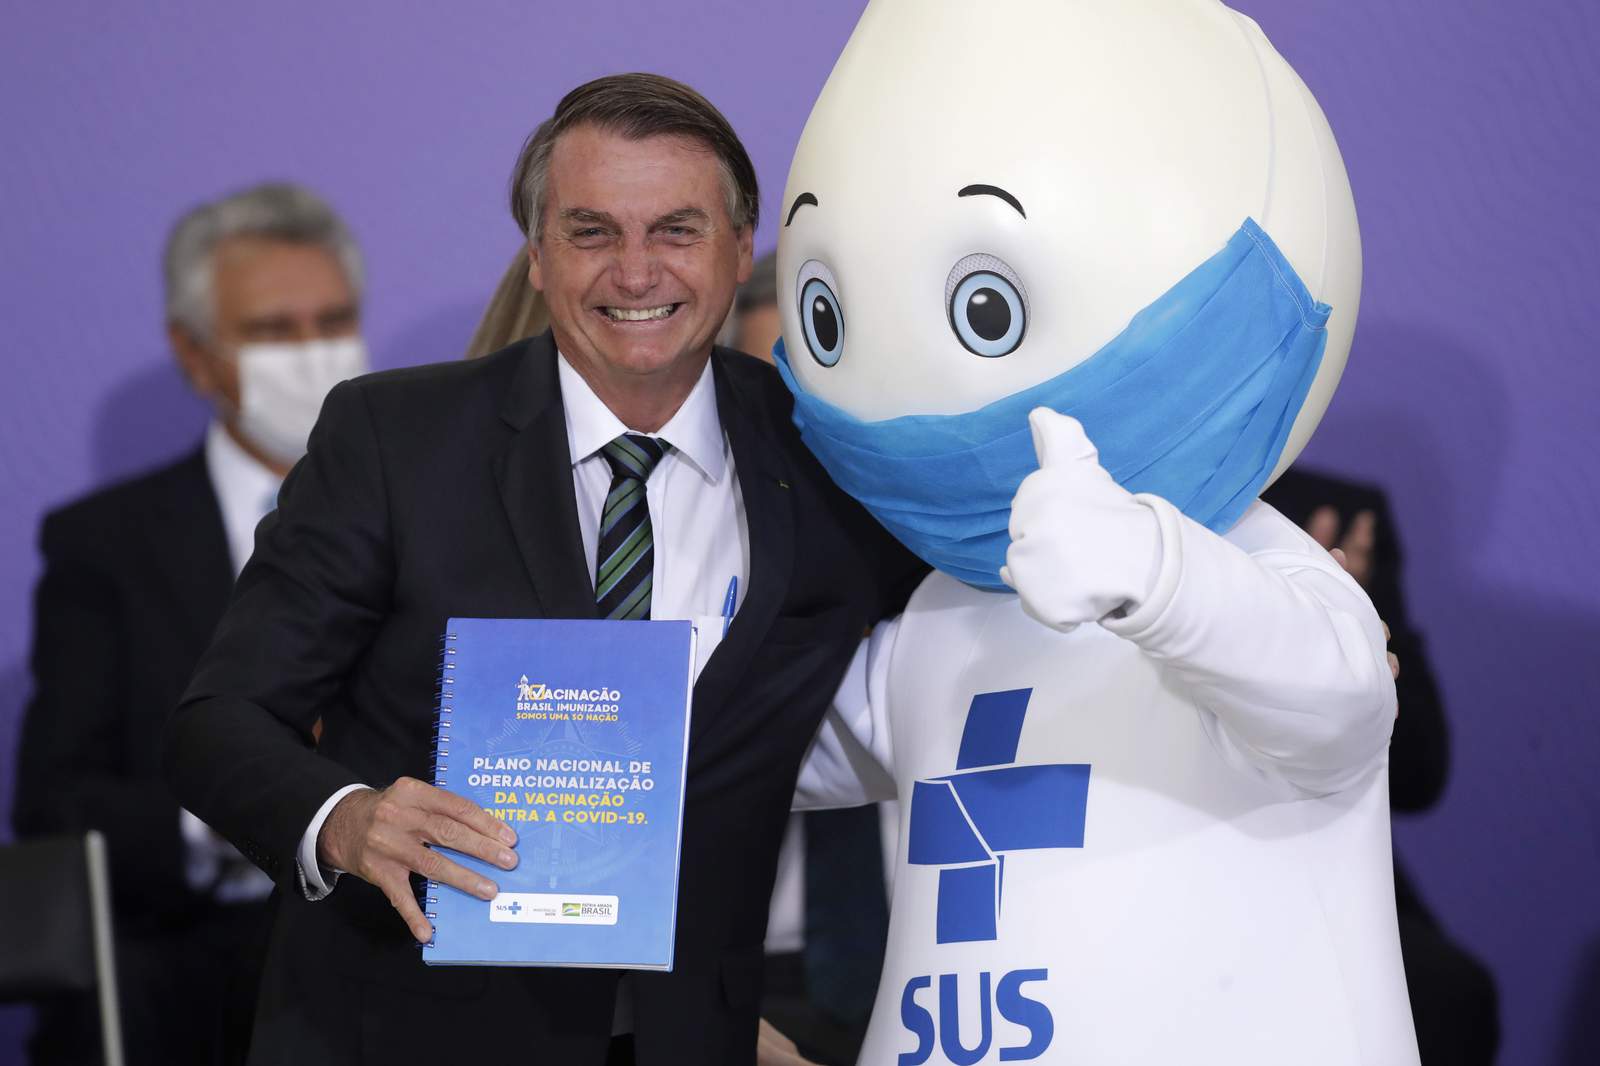 Brazil wonders about whereabouts of vaccine mascot